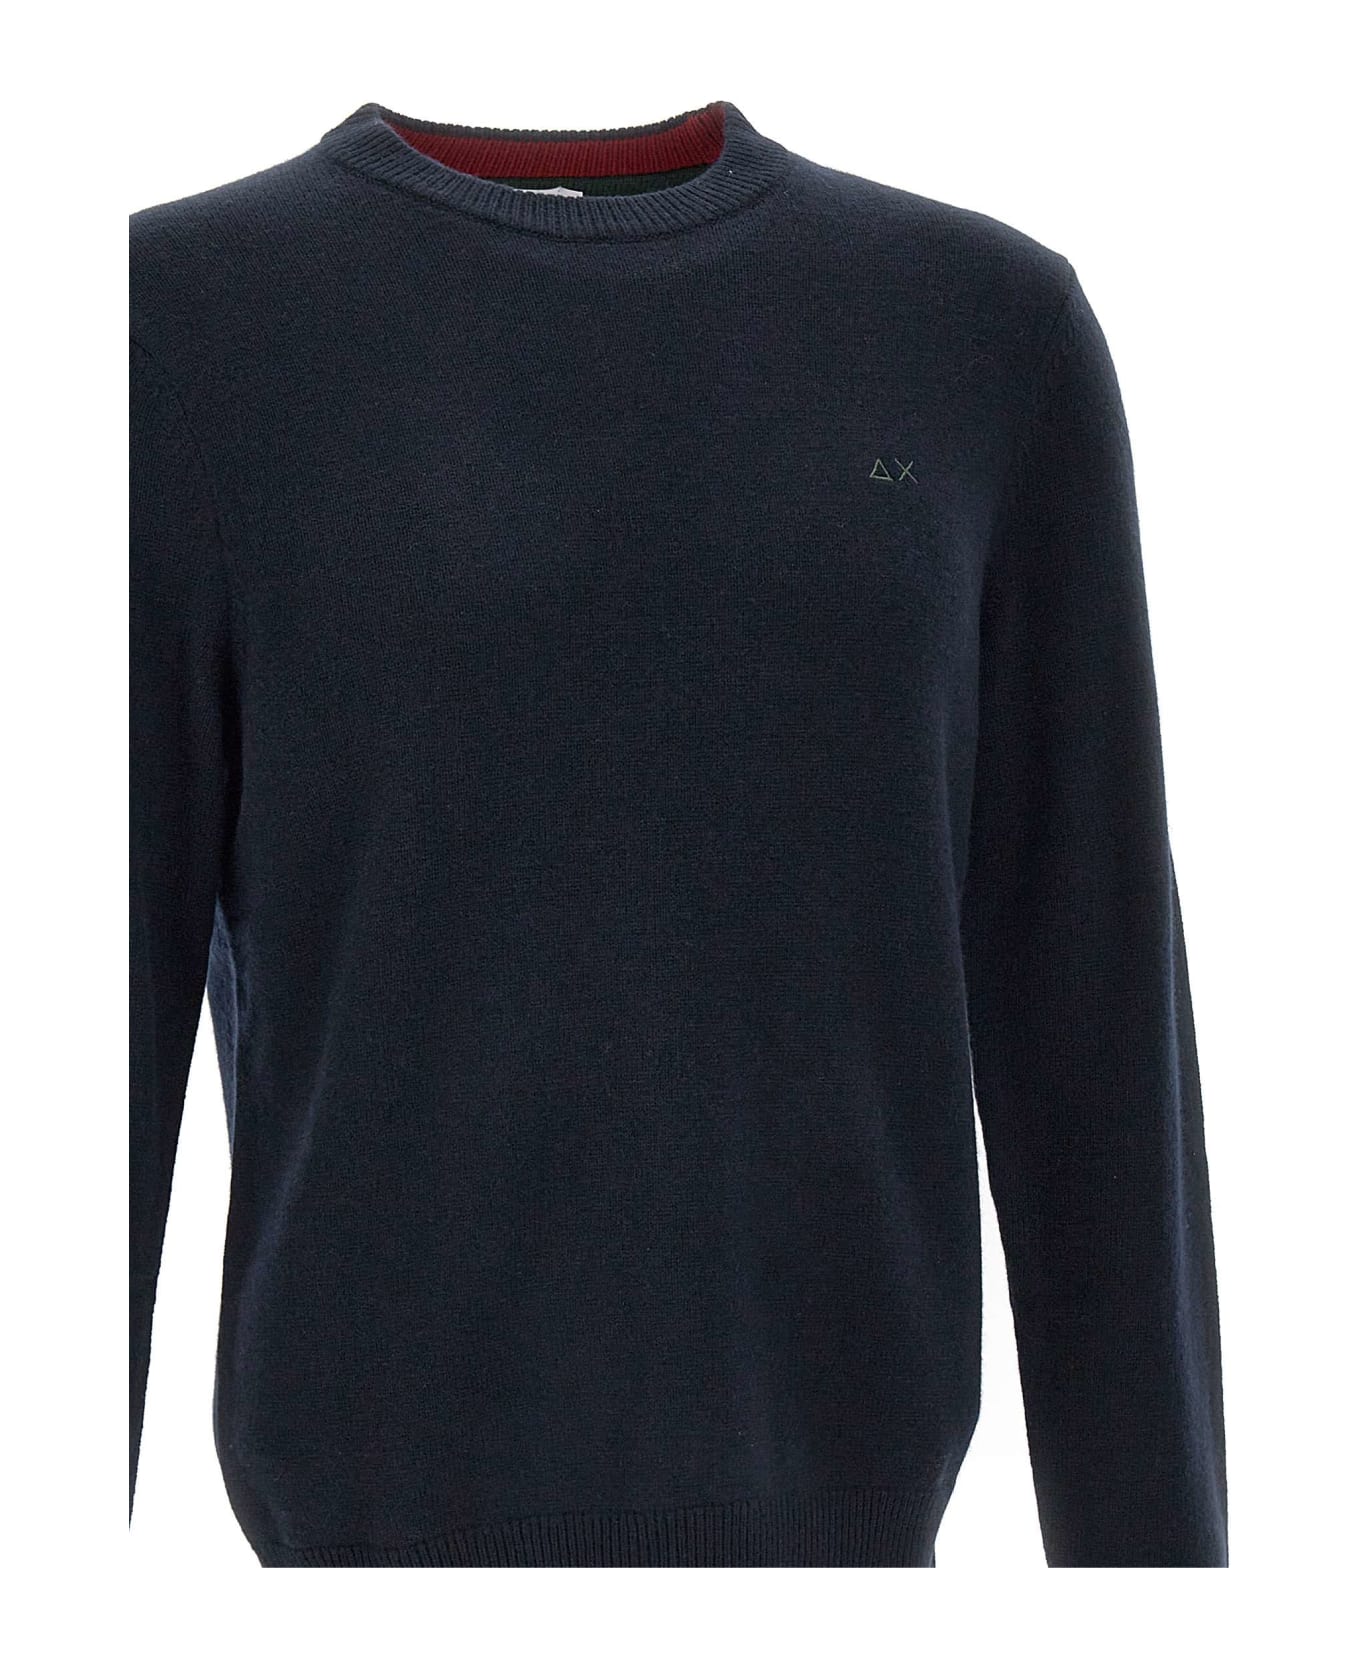 Sun 68 'round Solid' Wool And Viscose Blend Pullover - Nero